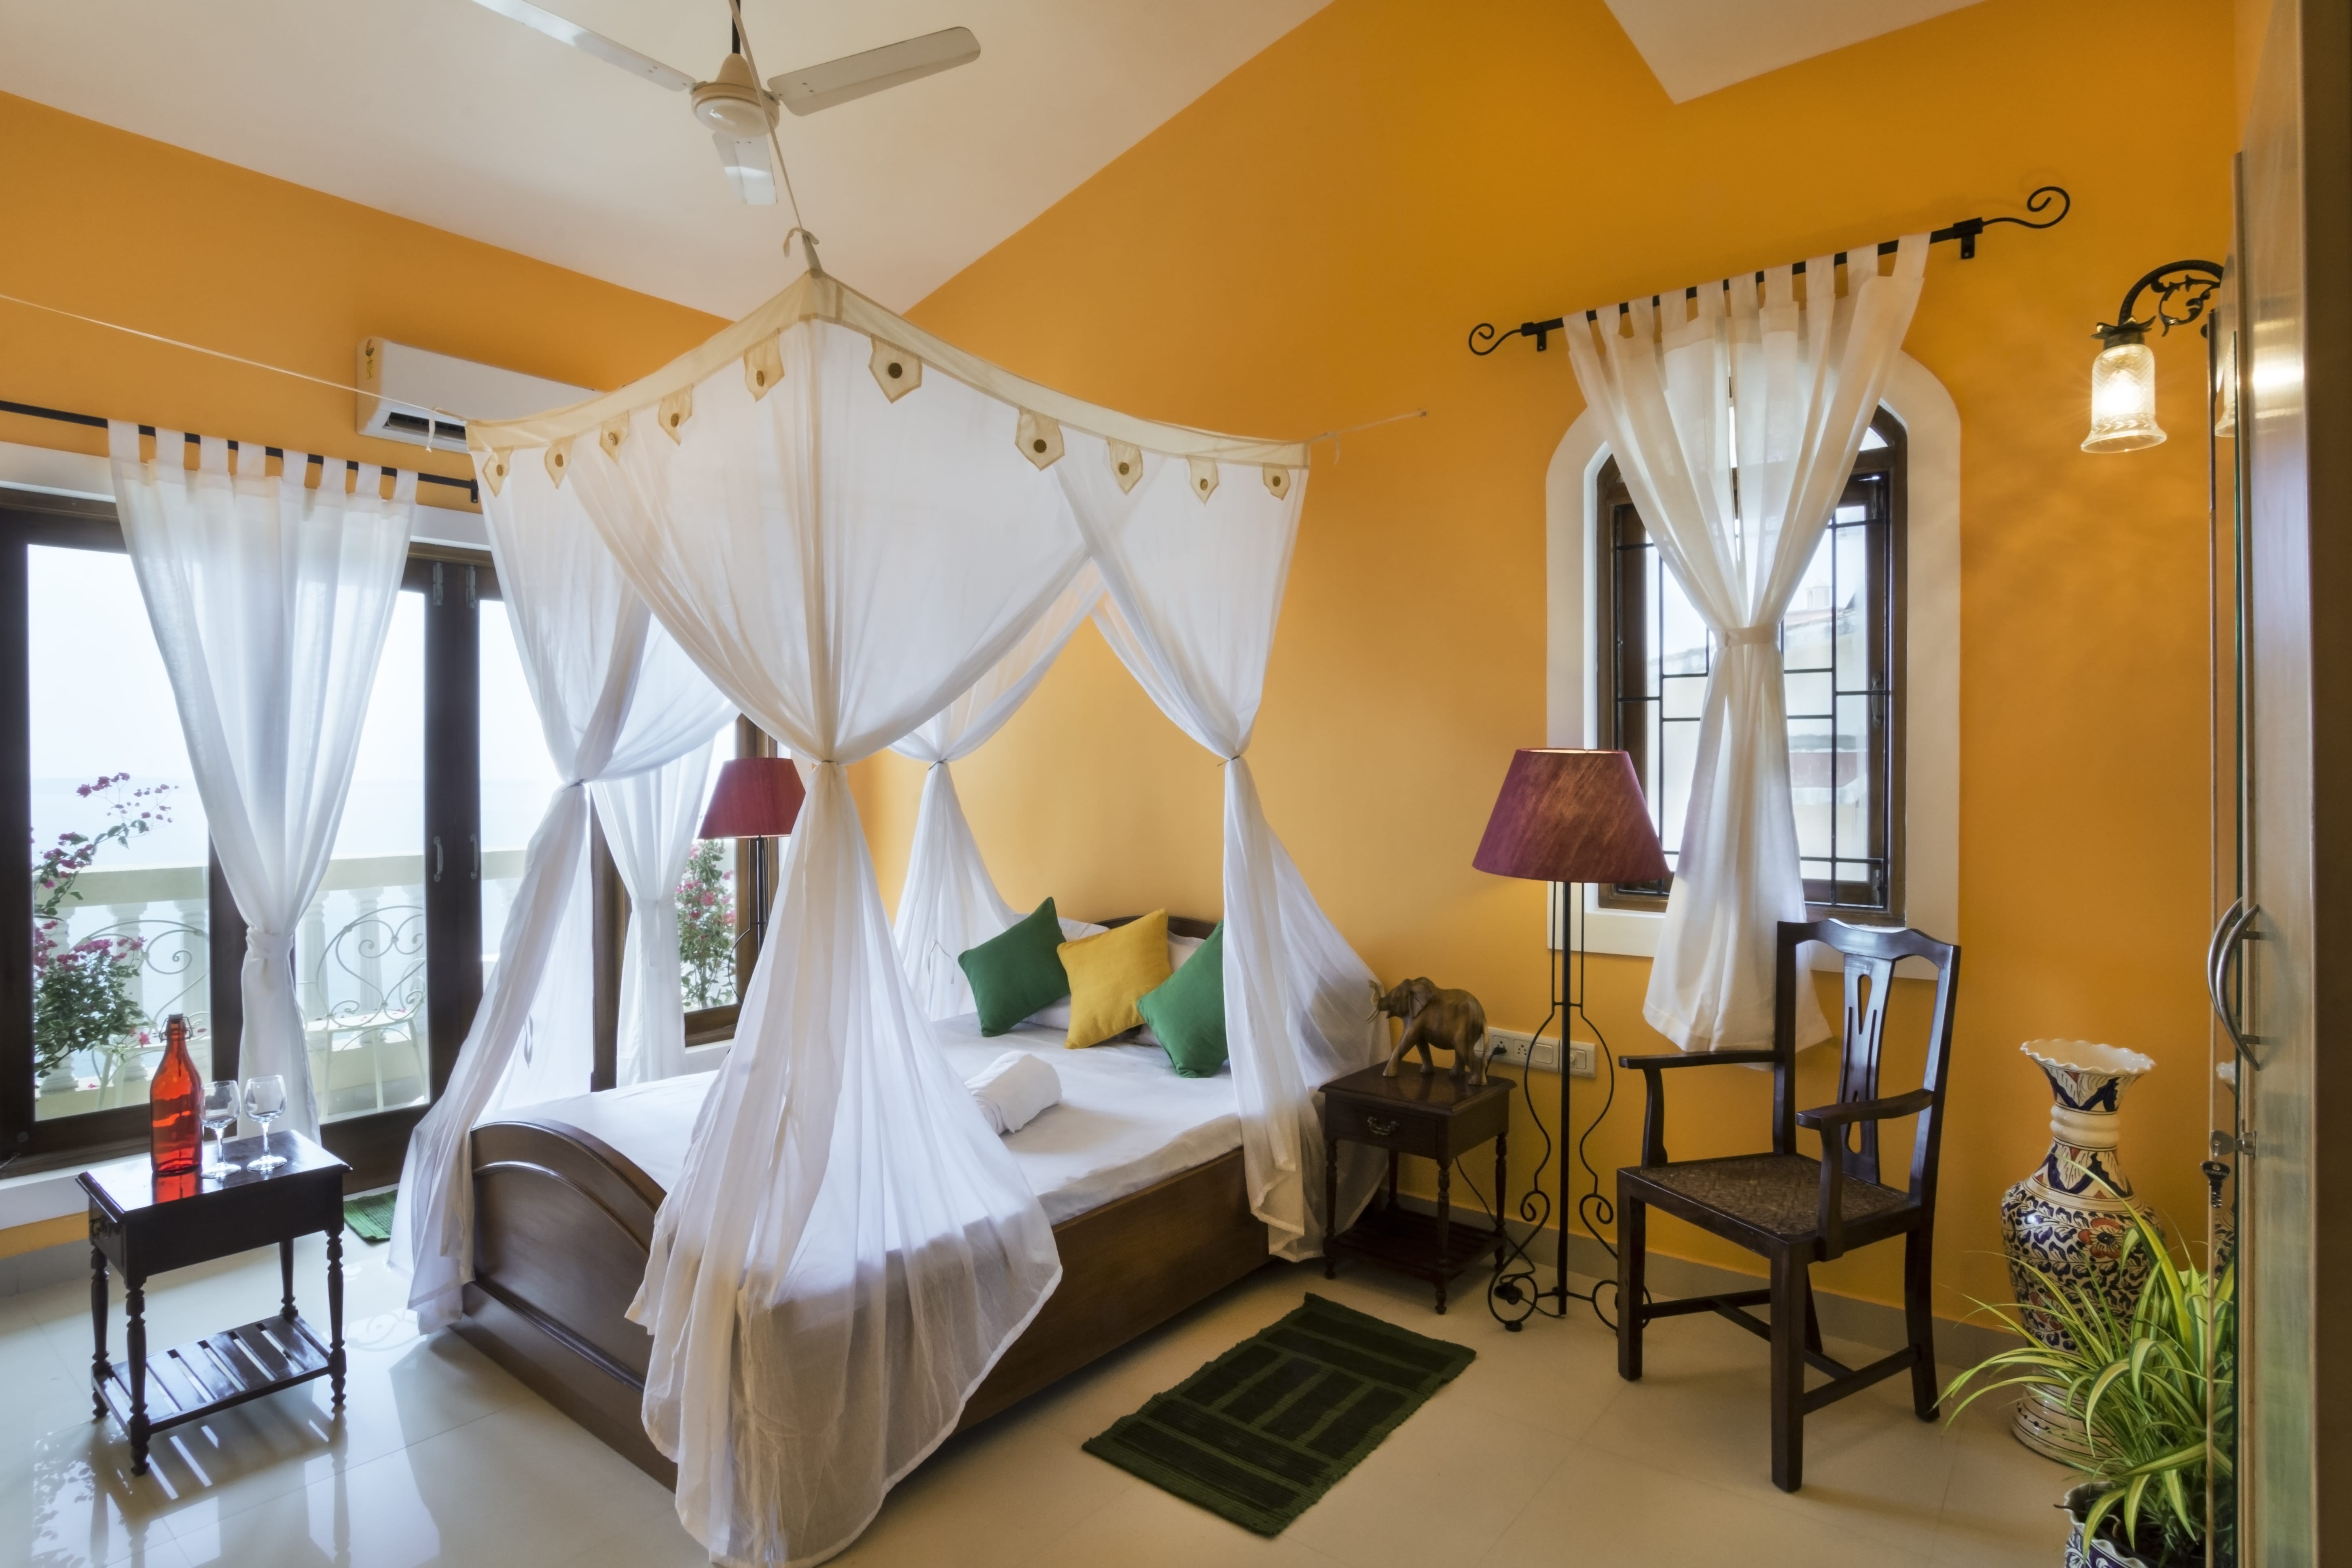 Holiday Homes in Goa